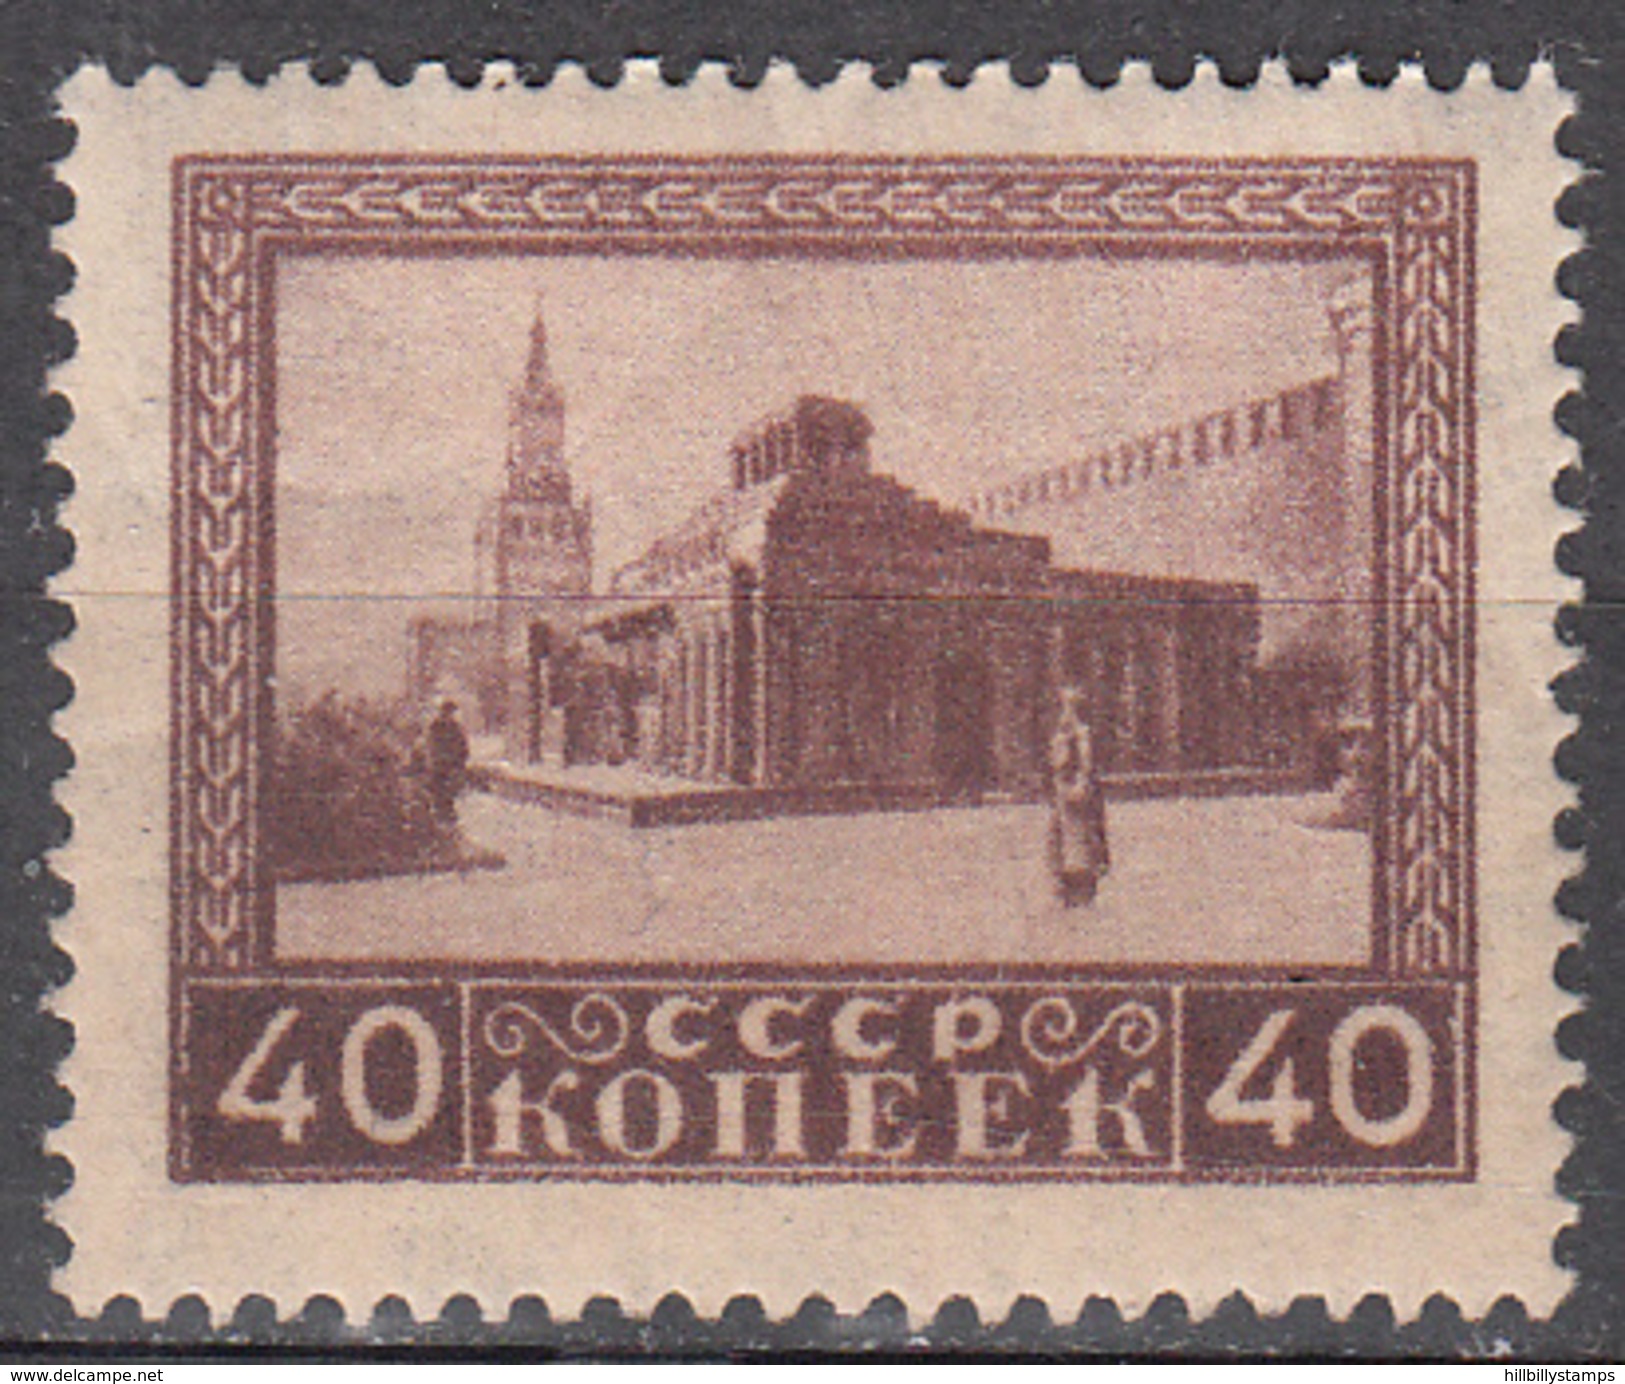 RUSSIA       SCOTT NO.  301    MINT HINGED       YEAR  1925   THICK PAPER - Nuovi